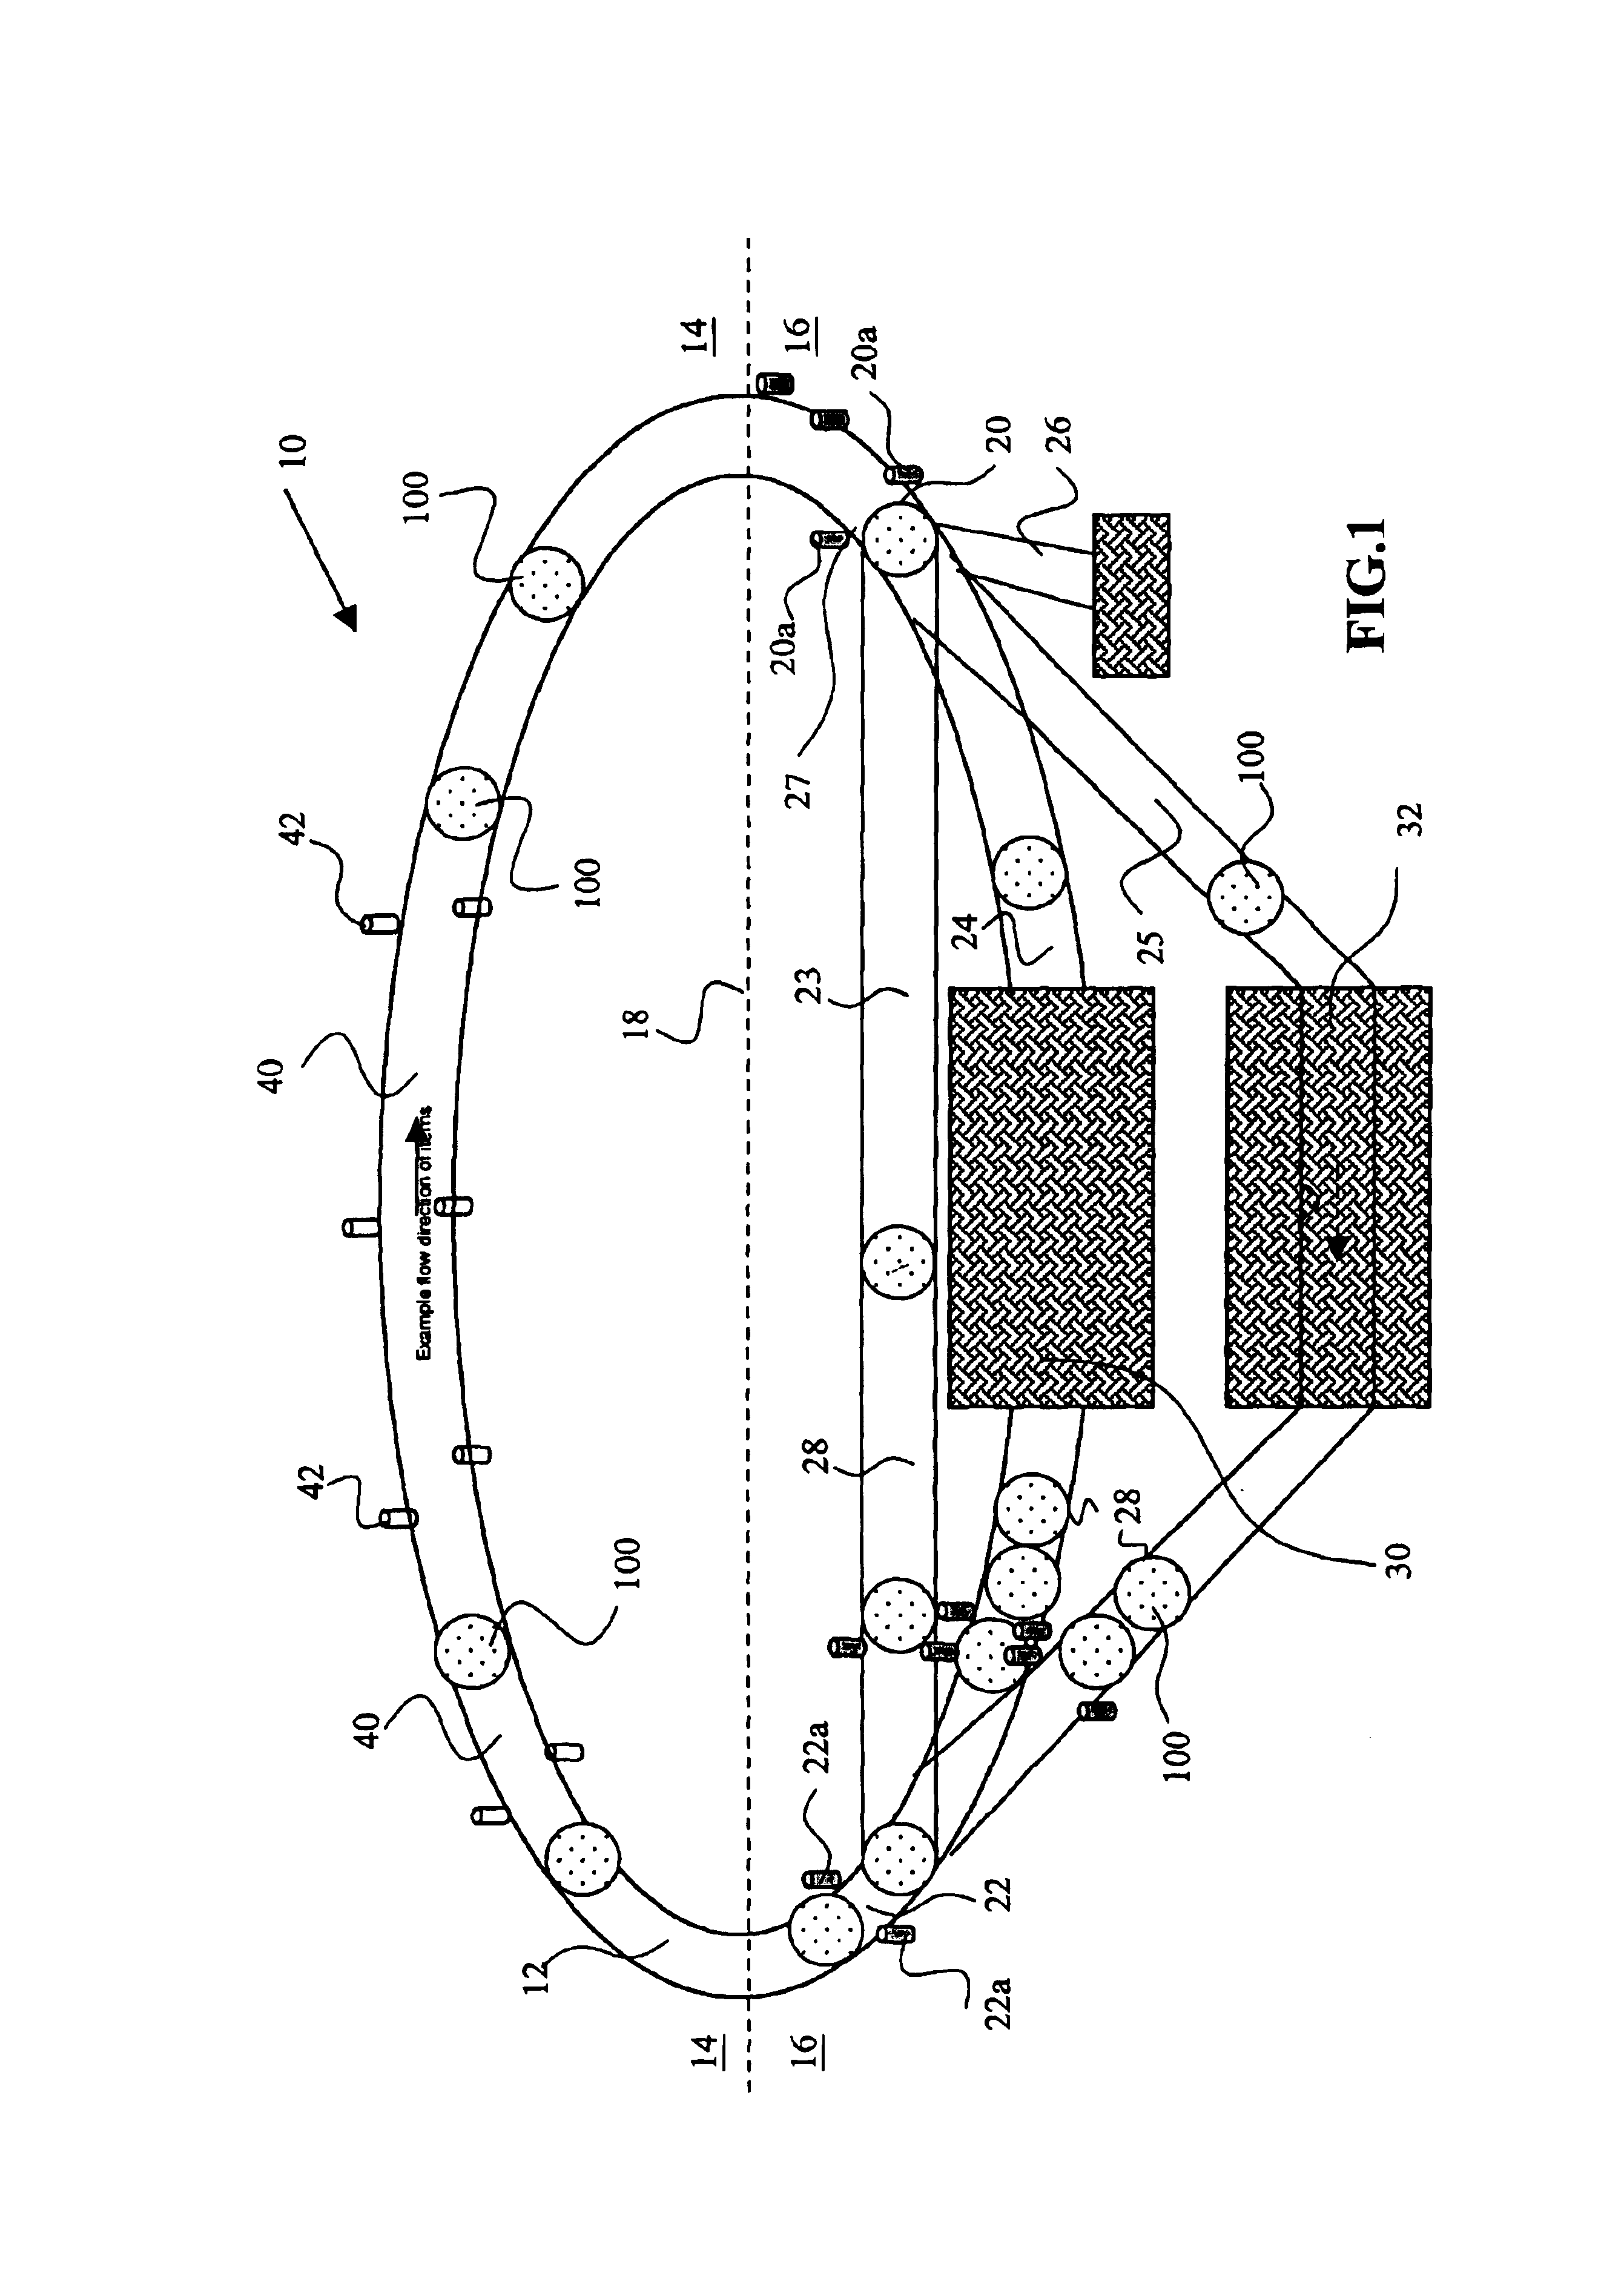 Apparatus, method and system for food management and food inventory